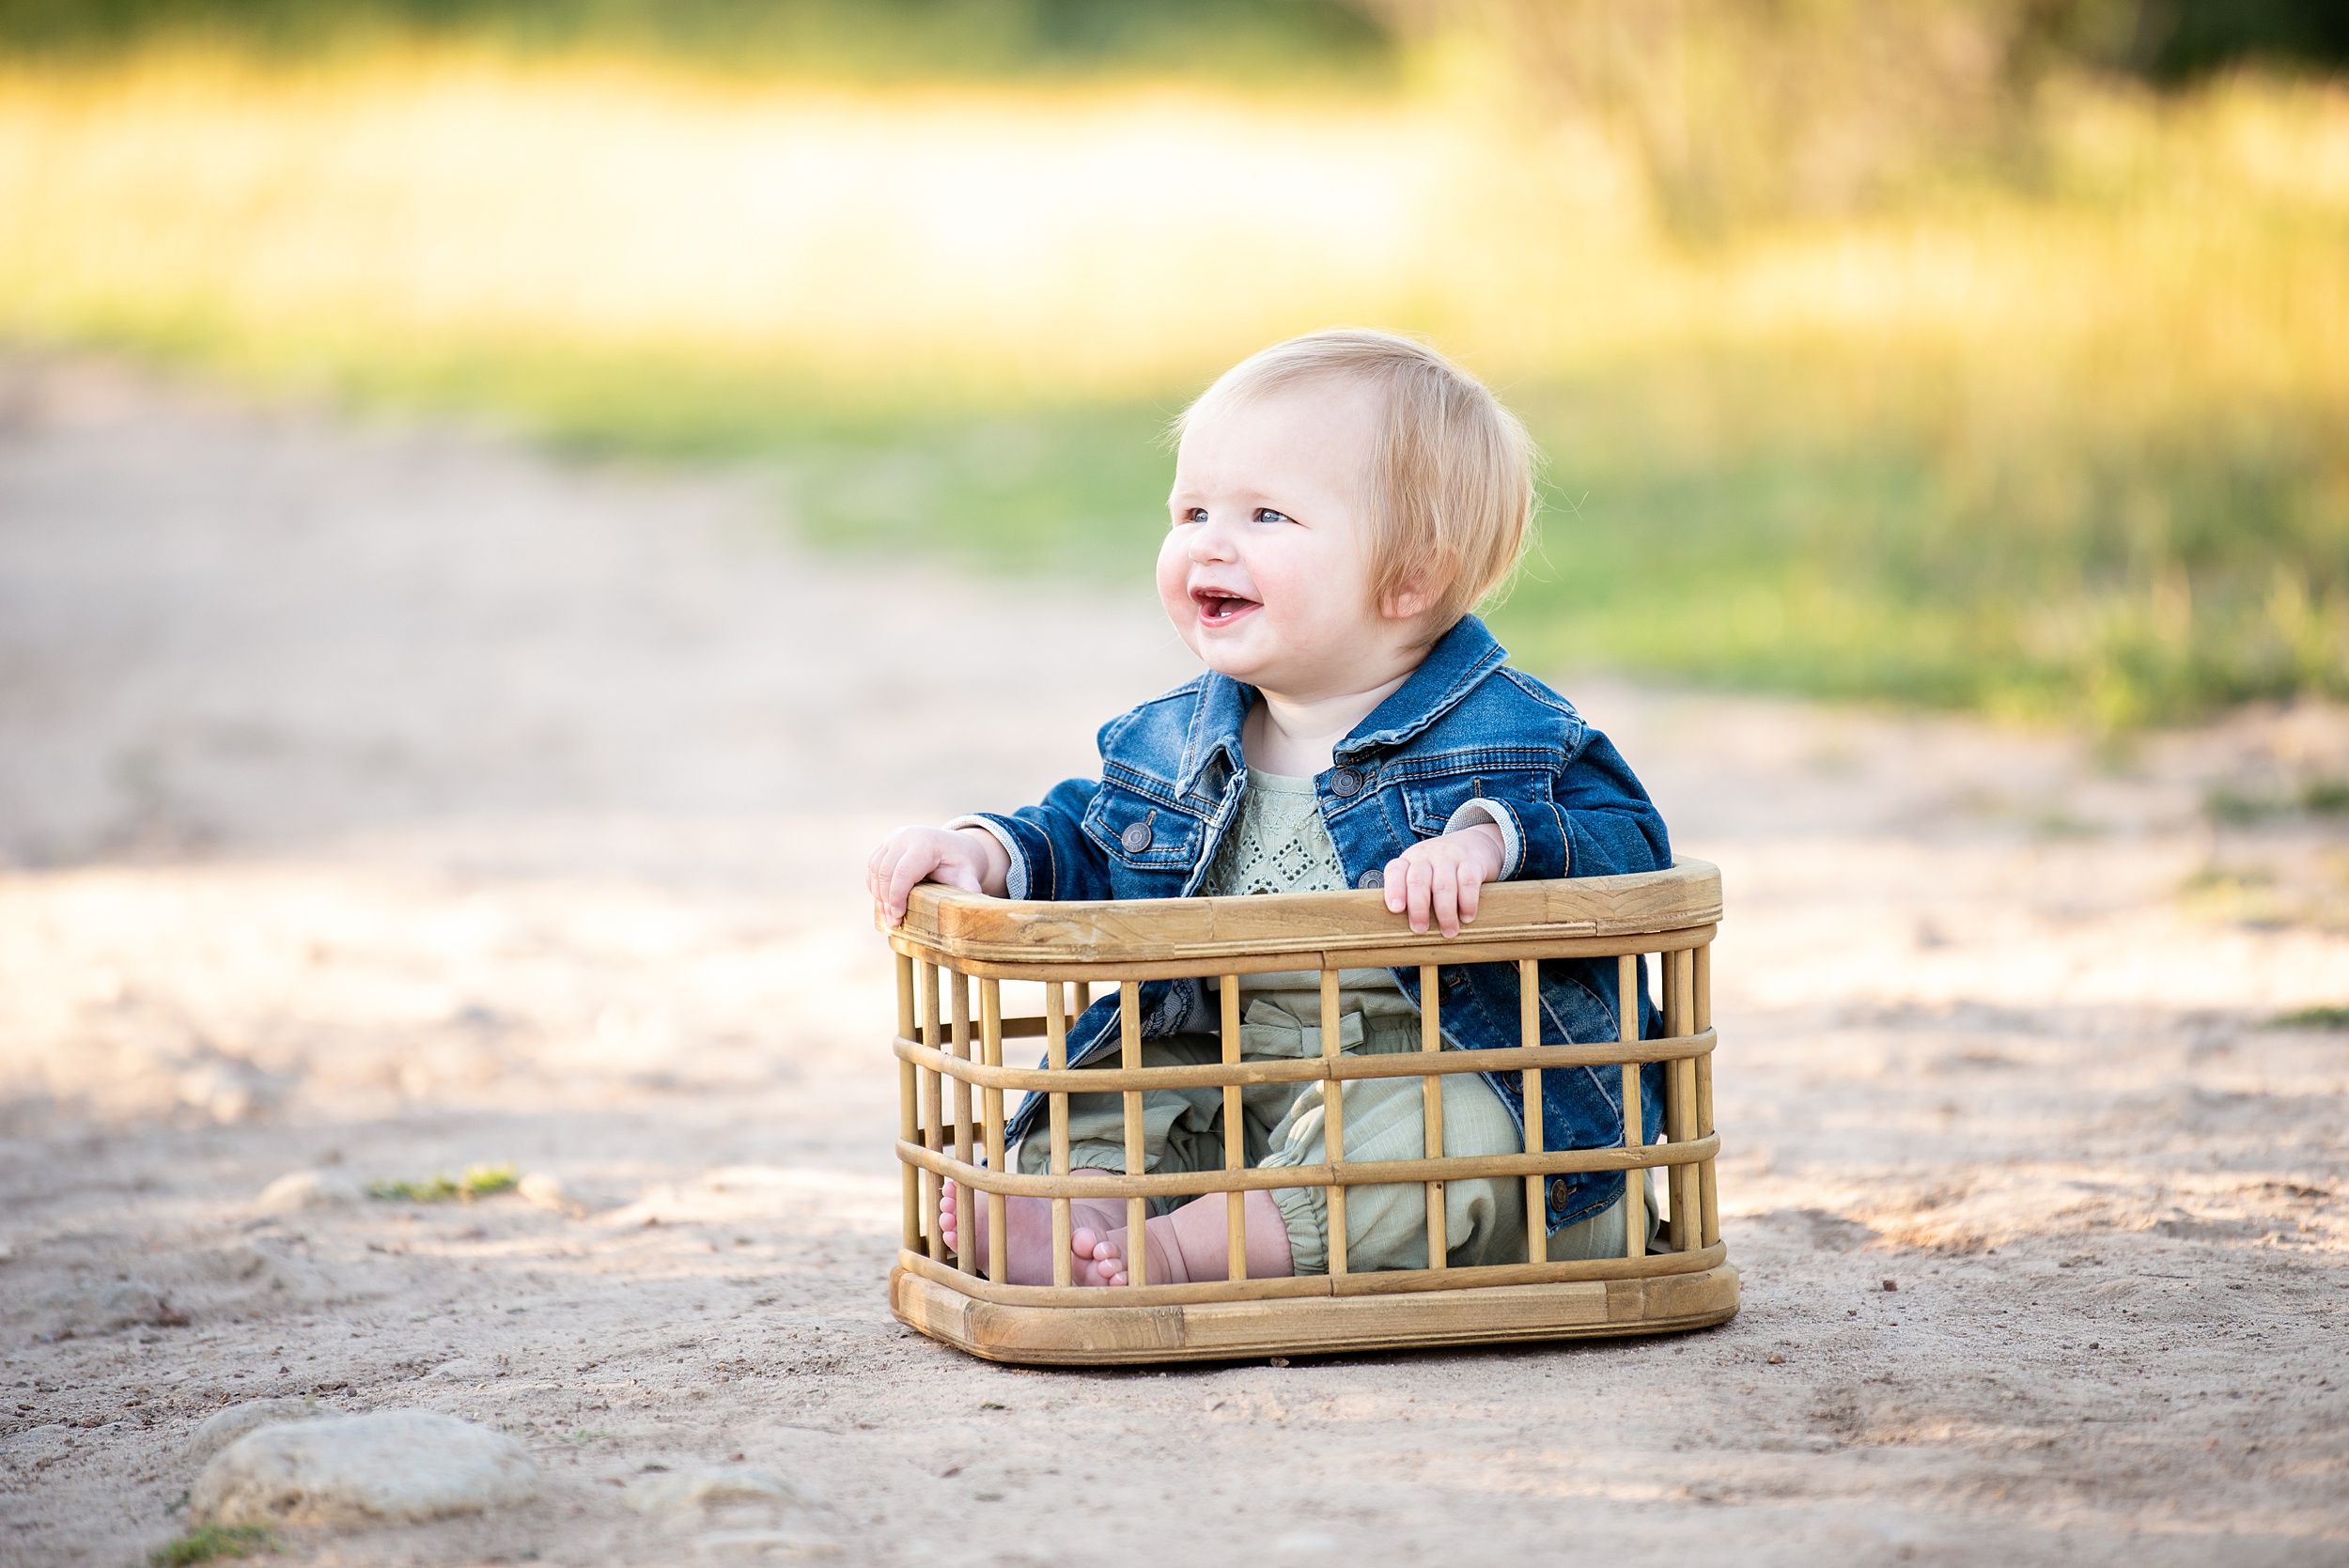 A young toddler sits in a wooden basket in a park trail at sunset after meeting a san diego au pair